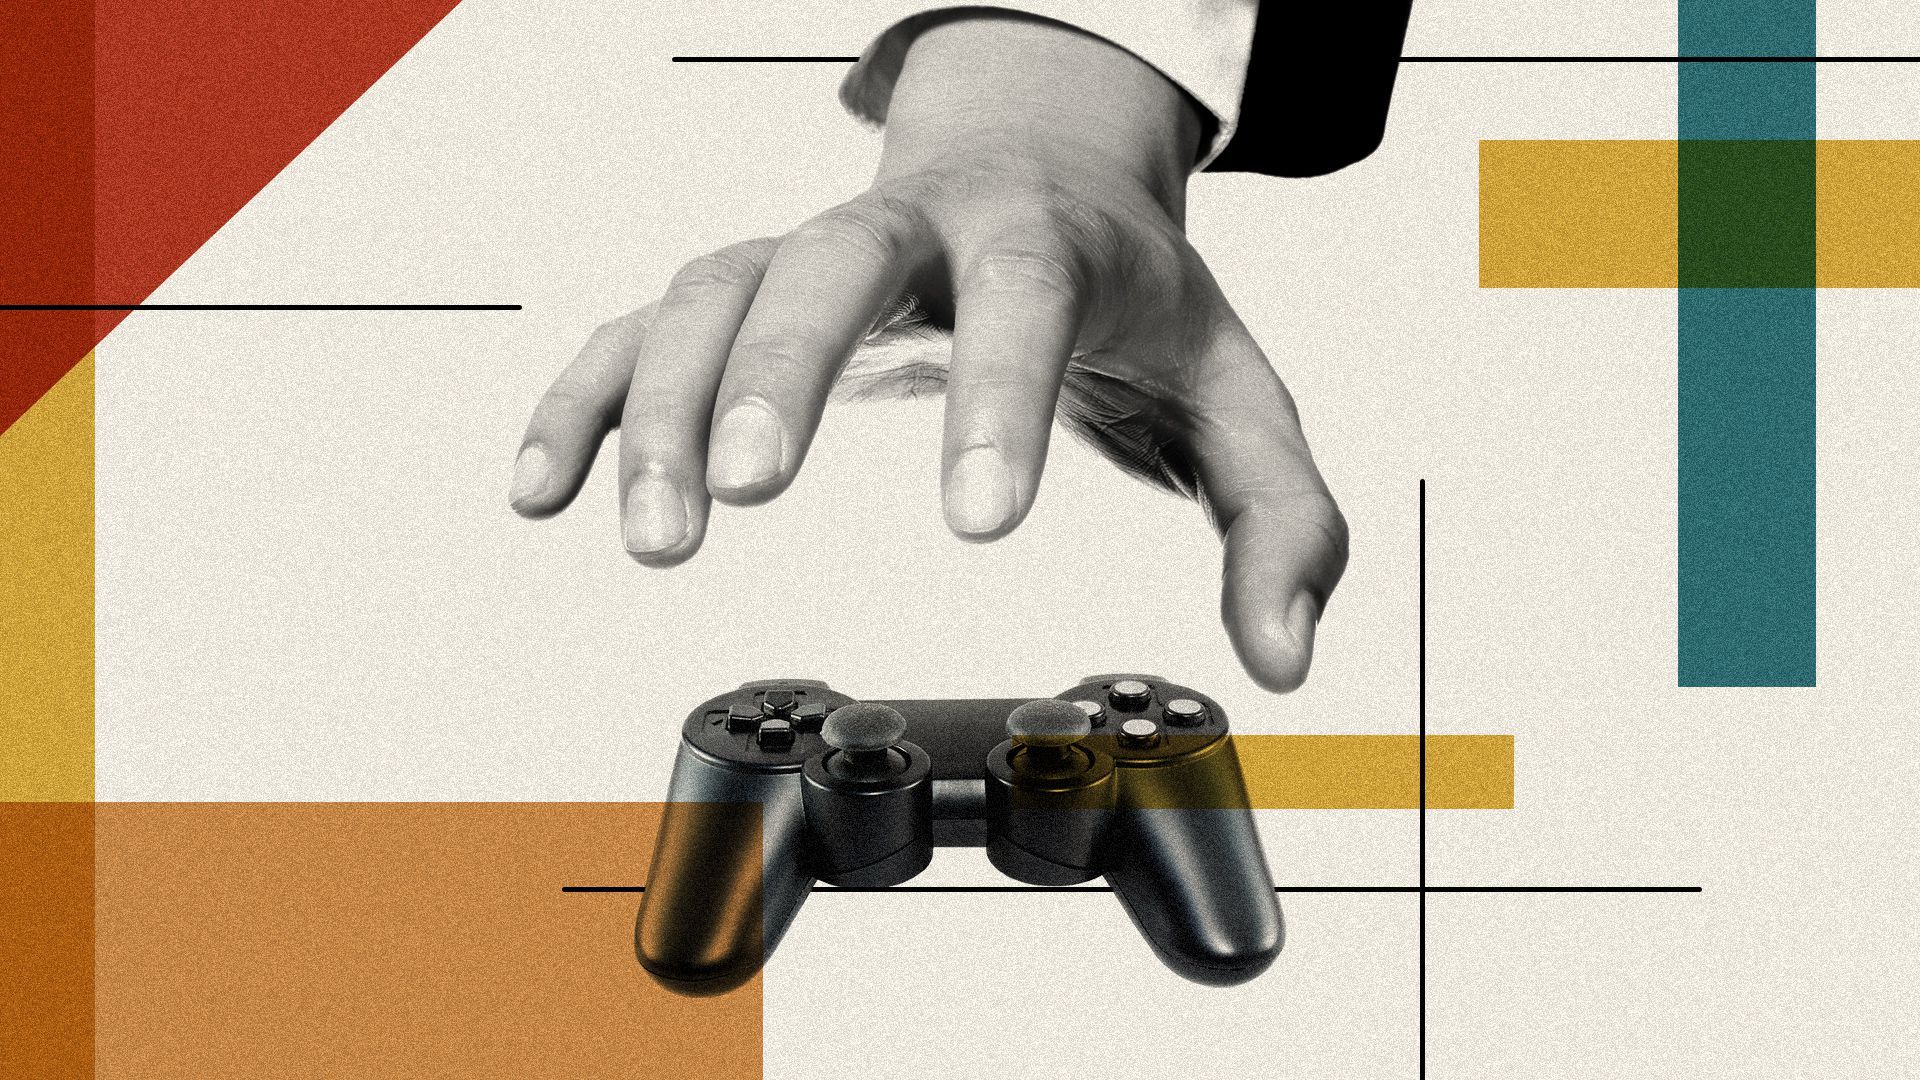 Illustration of a hand in a suit about to grab a video game controller